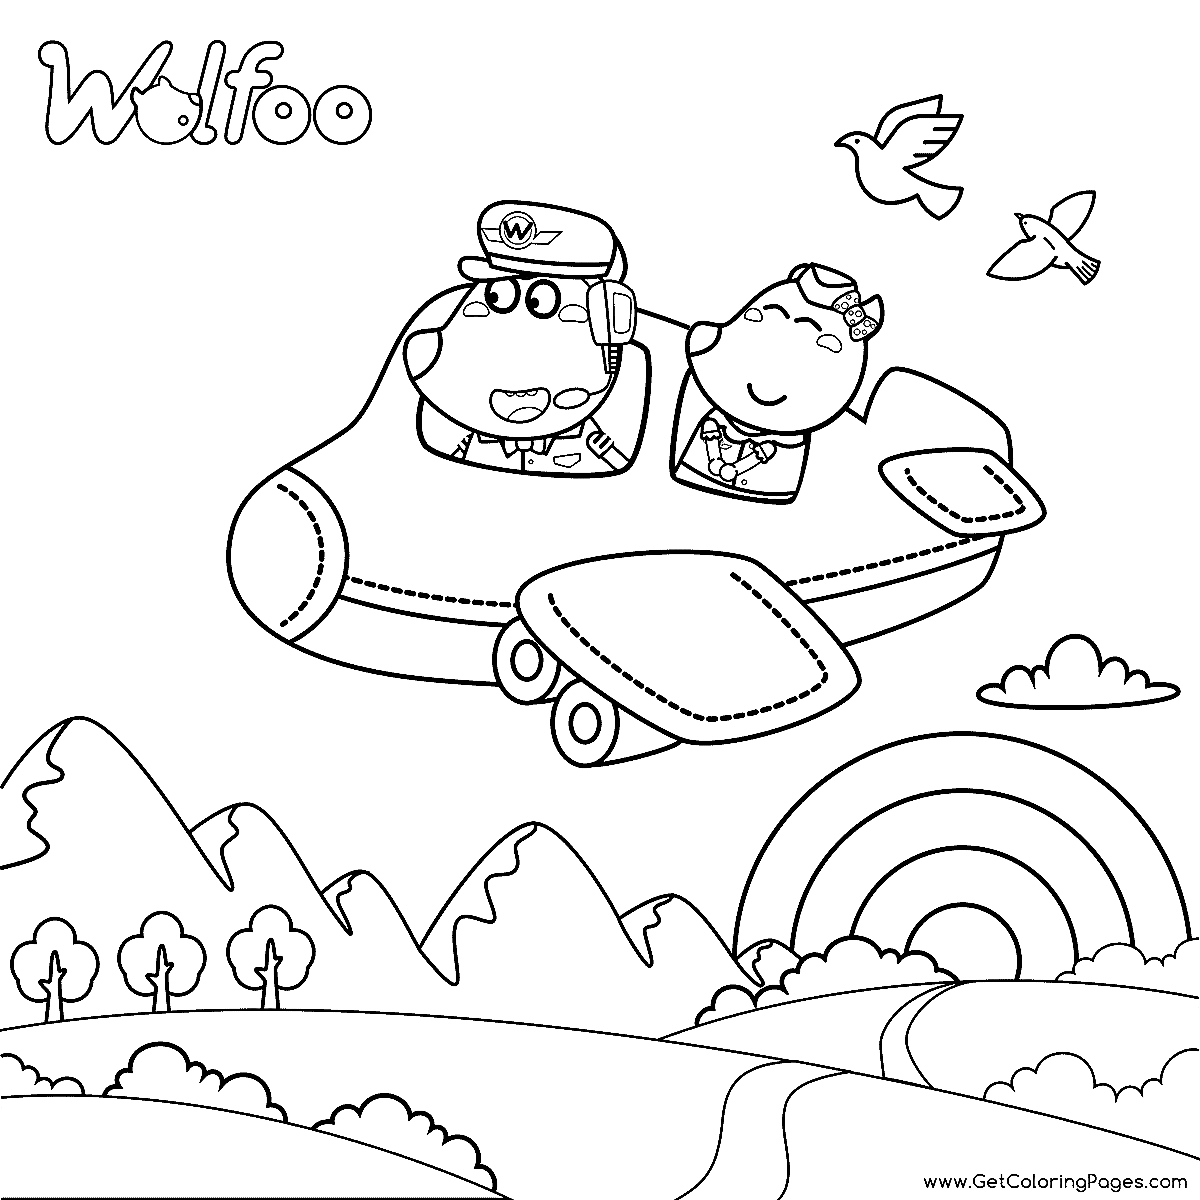 Wolfoo coloring pages  Coloring pages, Cartoon drawings, Peppa pig  coloring pages